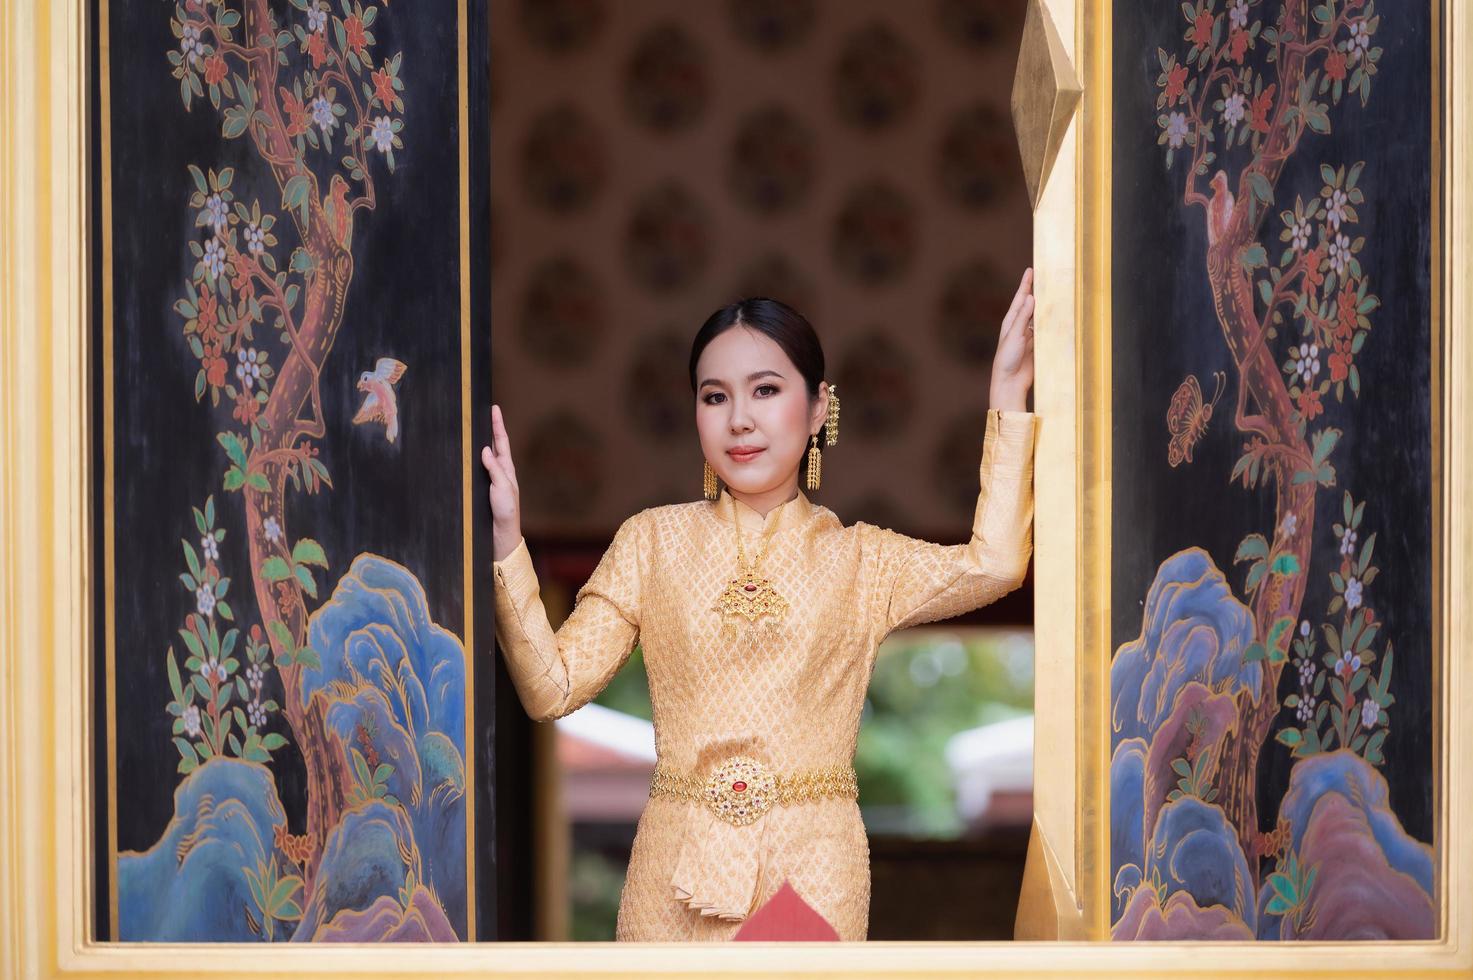 A beautiful, graceful Thai woman in Thai dress adorned with valuable jewelry stands in a beautiful ancient Thai temple photo